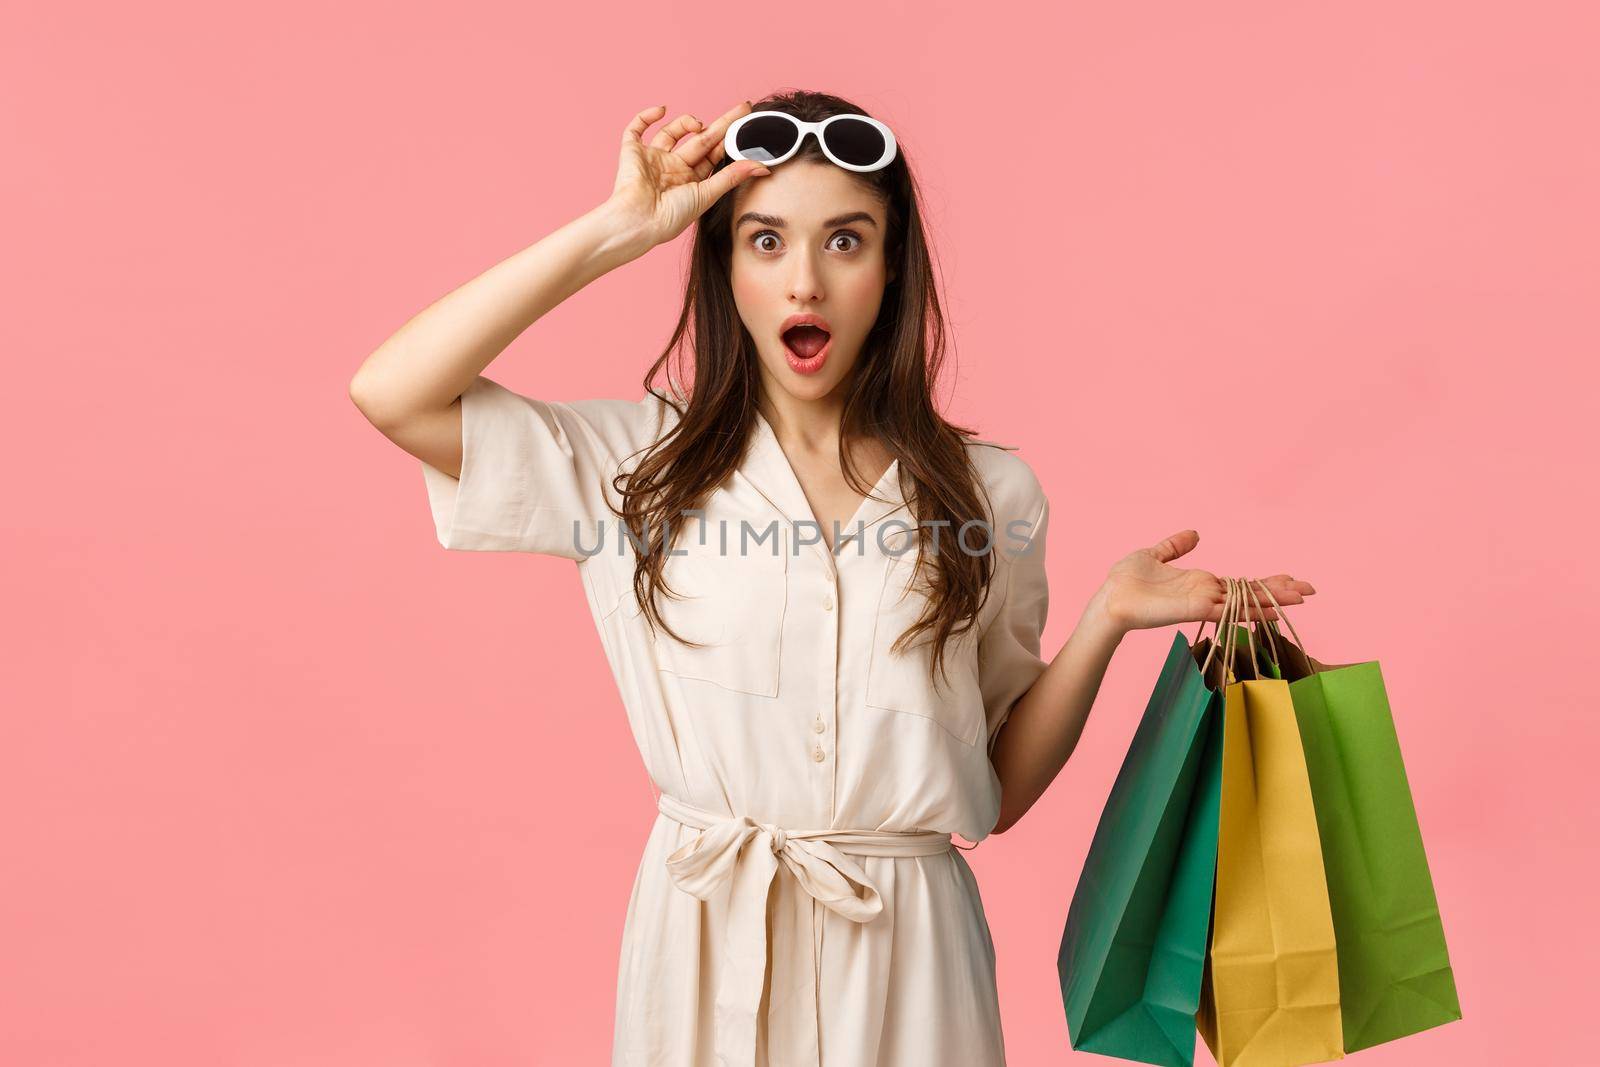 Lets go shopping. Amused and excited female shoppaholic having fun browsing through city malls, holding shop bags, taking-off glasses seeing exactly what been looking for, pink background.